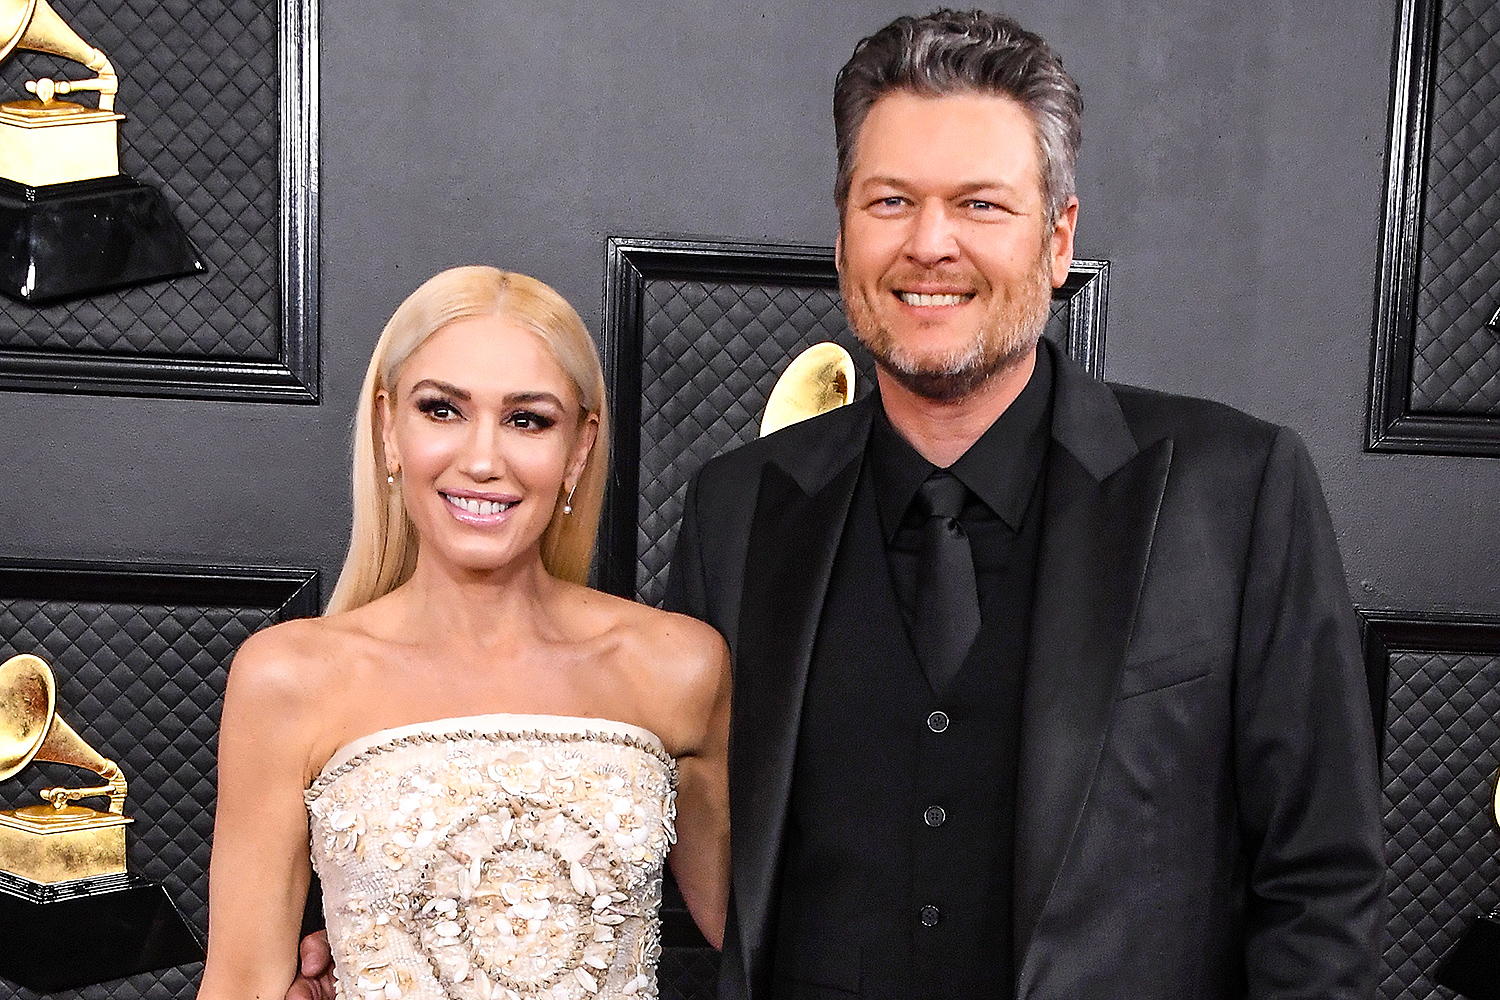 Blake Shelton Confirms That Fans Will Hear the Song He Wrote For Wife Gwen Stefani Very Soon (Watch)